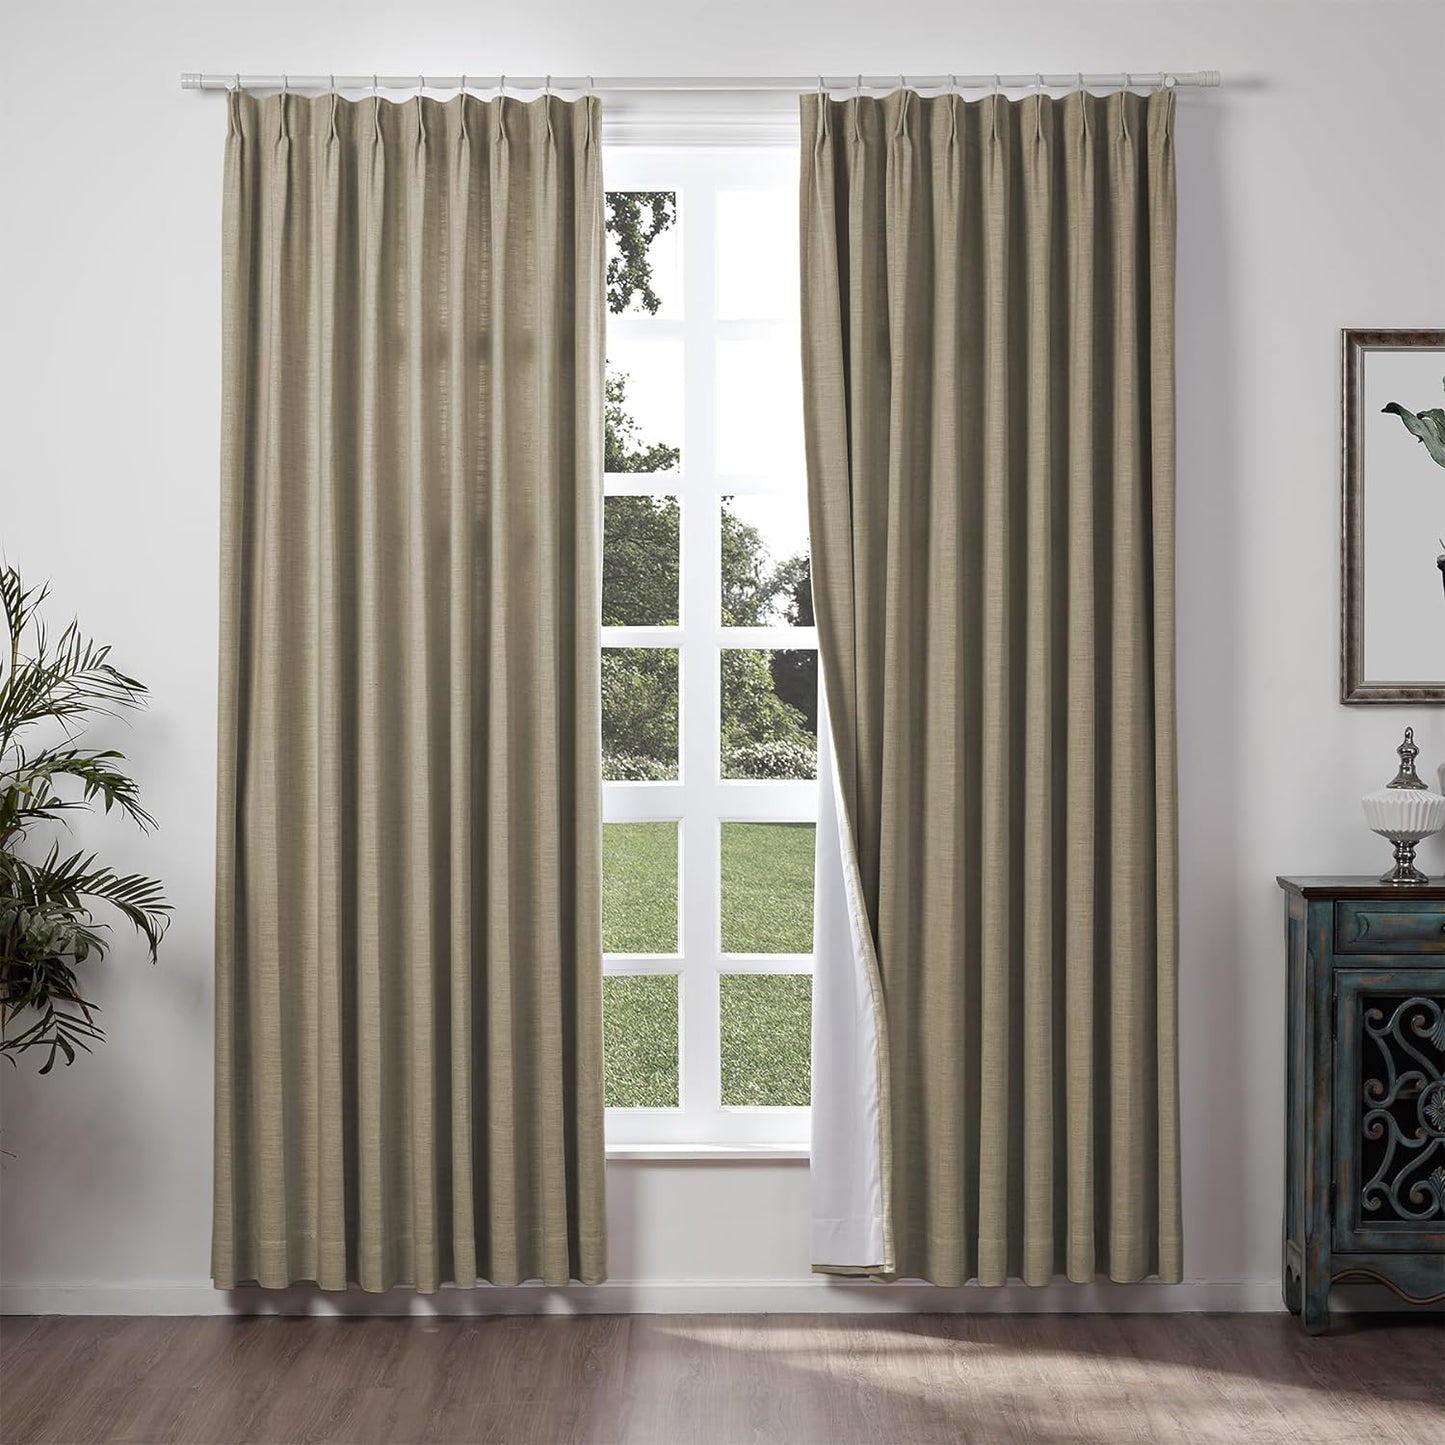 Chadmade 50" W X 63" L Polyester Linen Drape with Blackout Lining Pinch Pleat Curtain for Sliding Door Patio Door Living Room Bedroom, (1 Panel) Sand Beige Tallis Collection  ChadMade Oak (10) 100Wx84L 